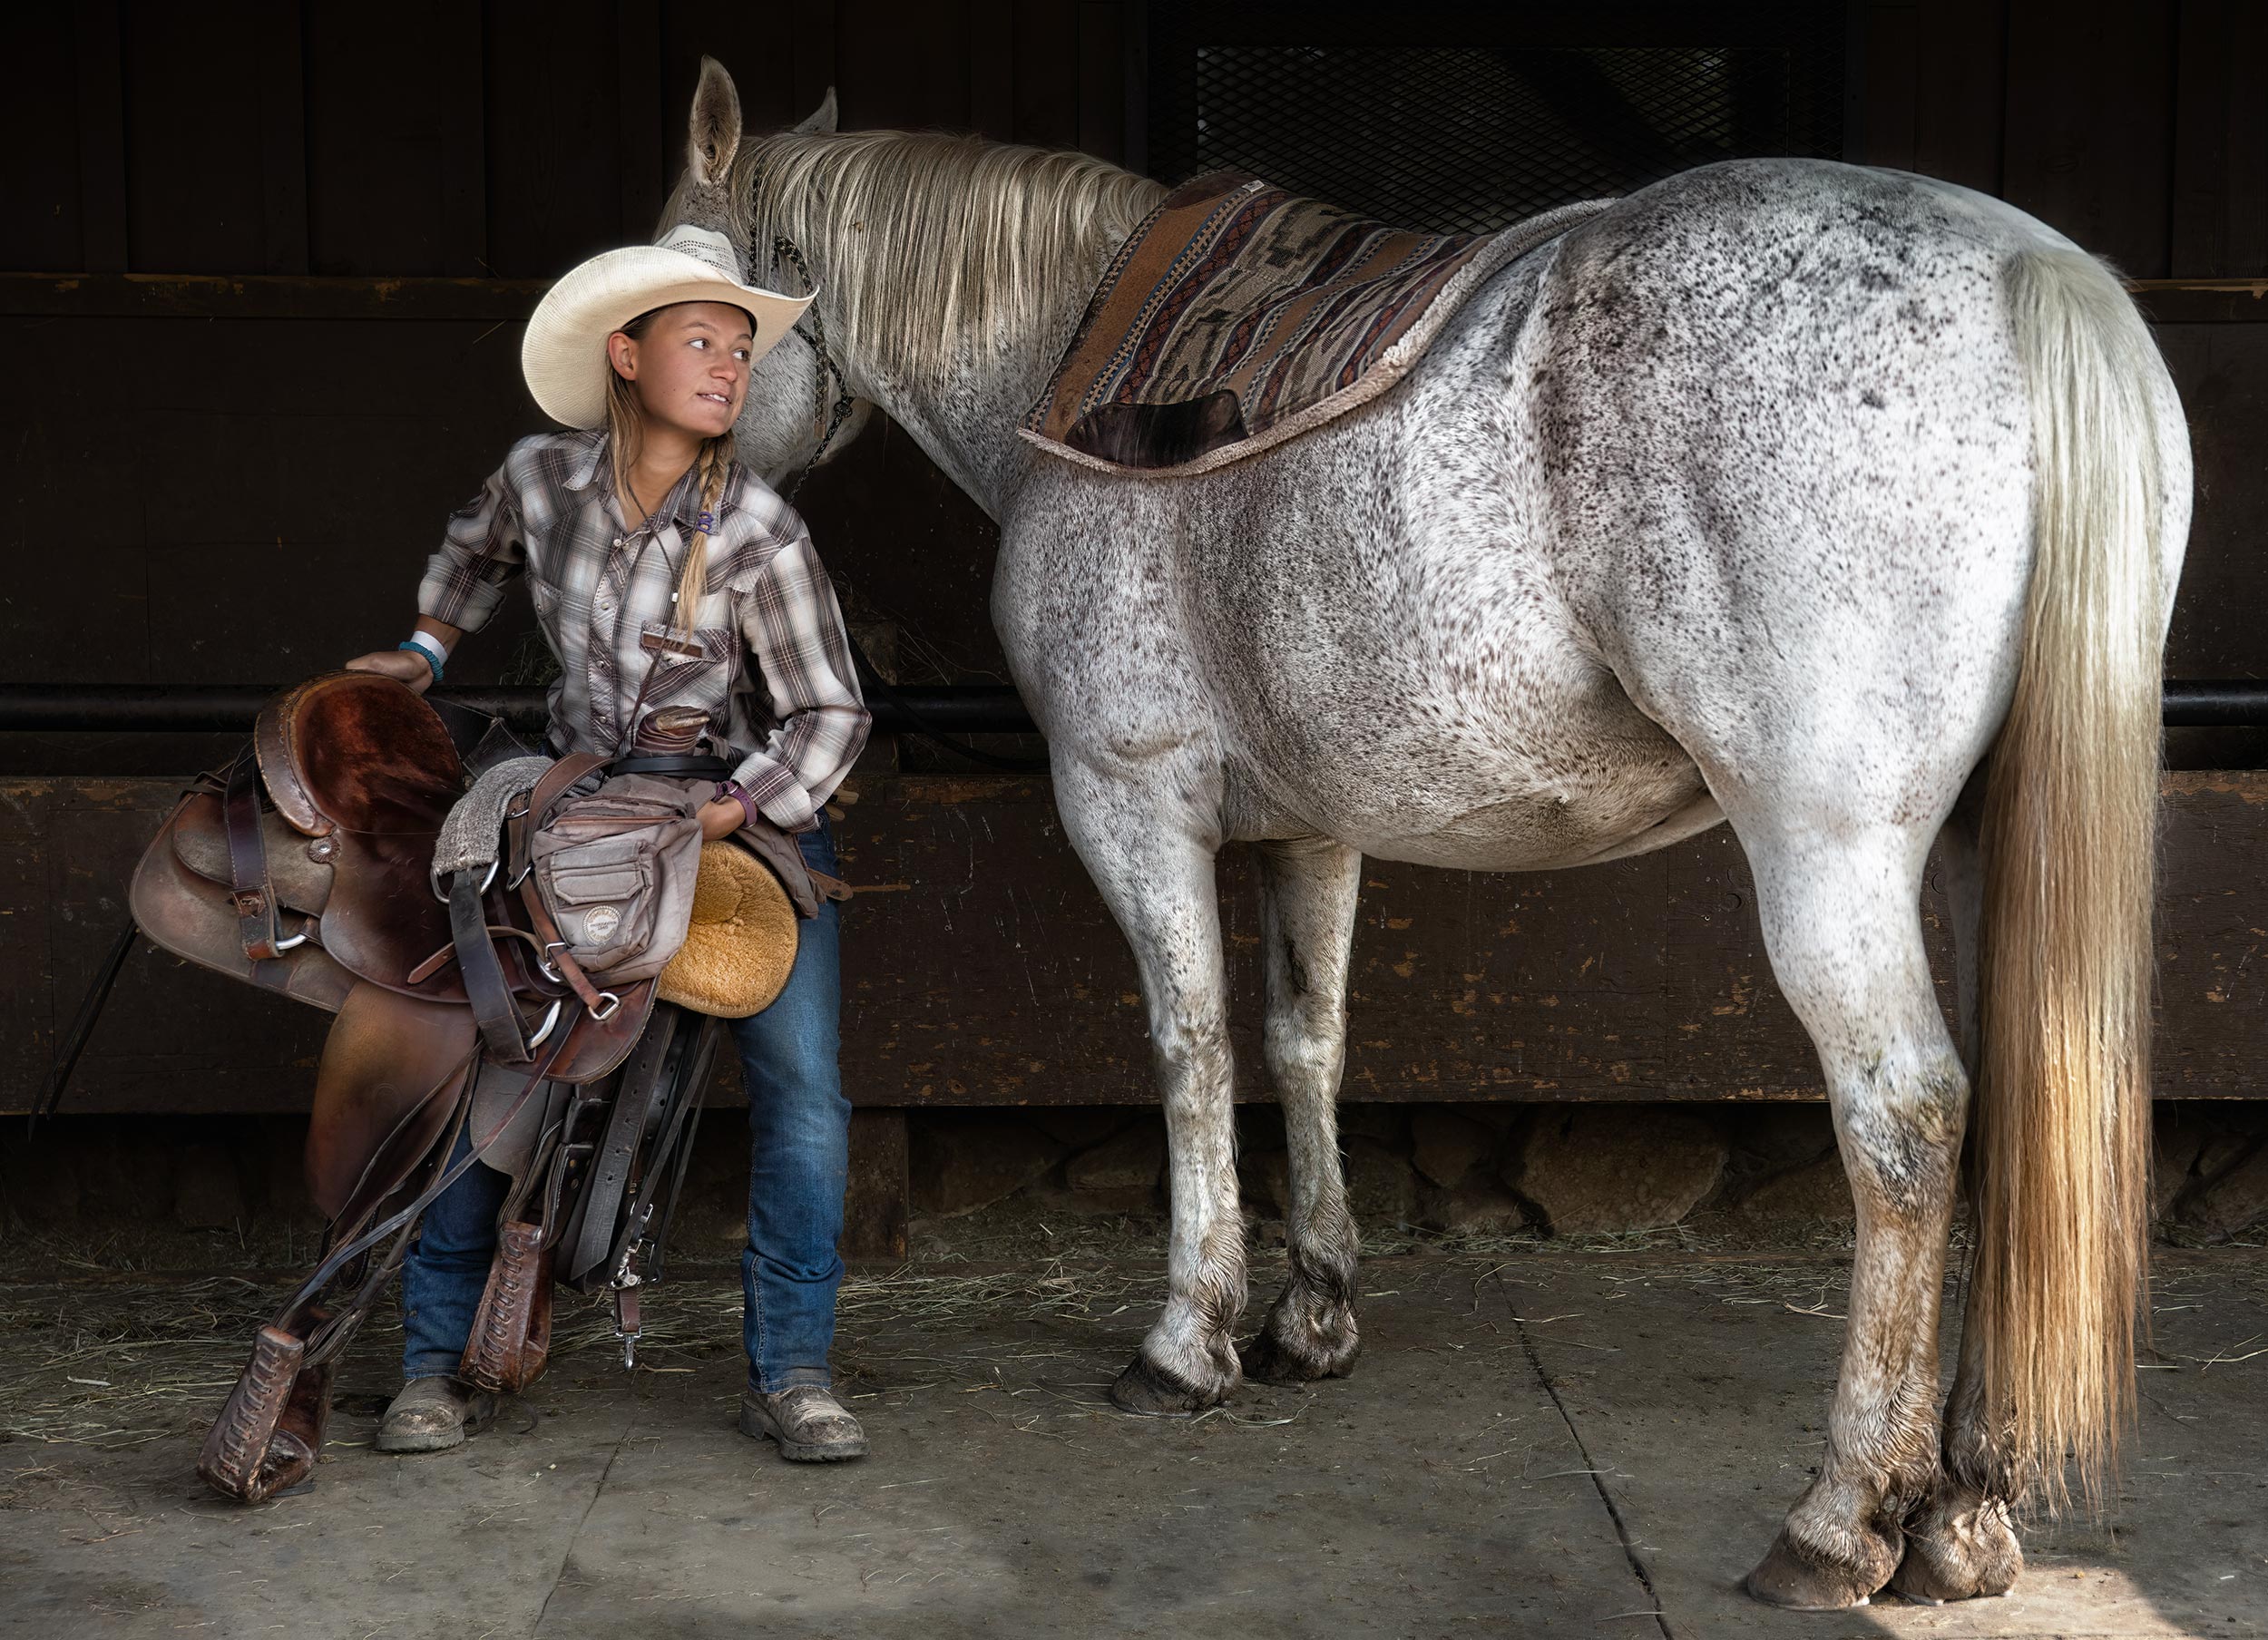 Cowgirl saddling horse for a ride. Livestock and agriculture photography